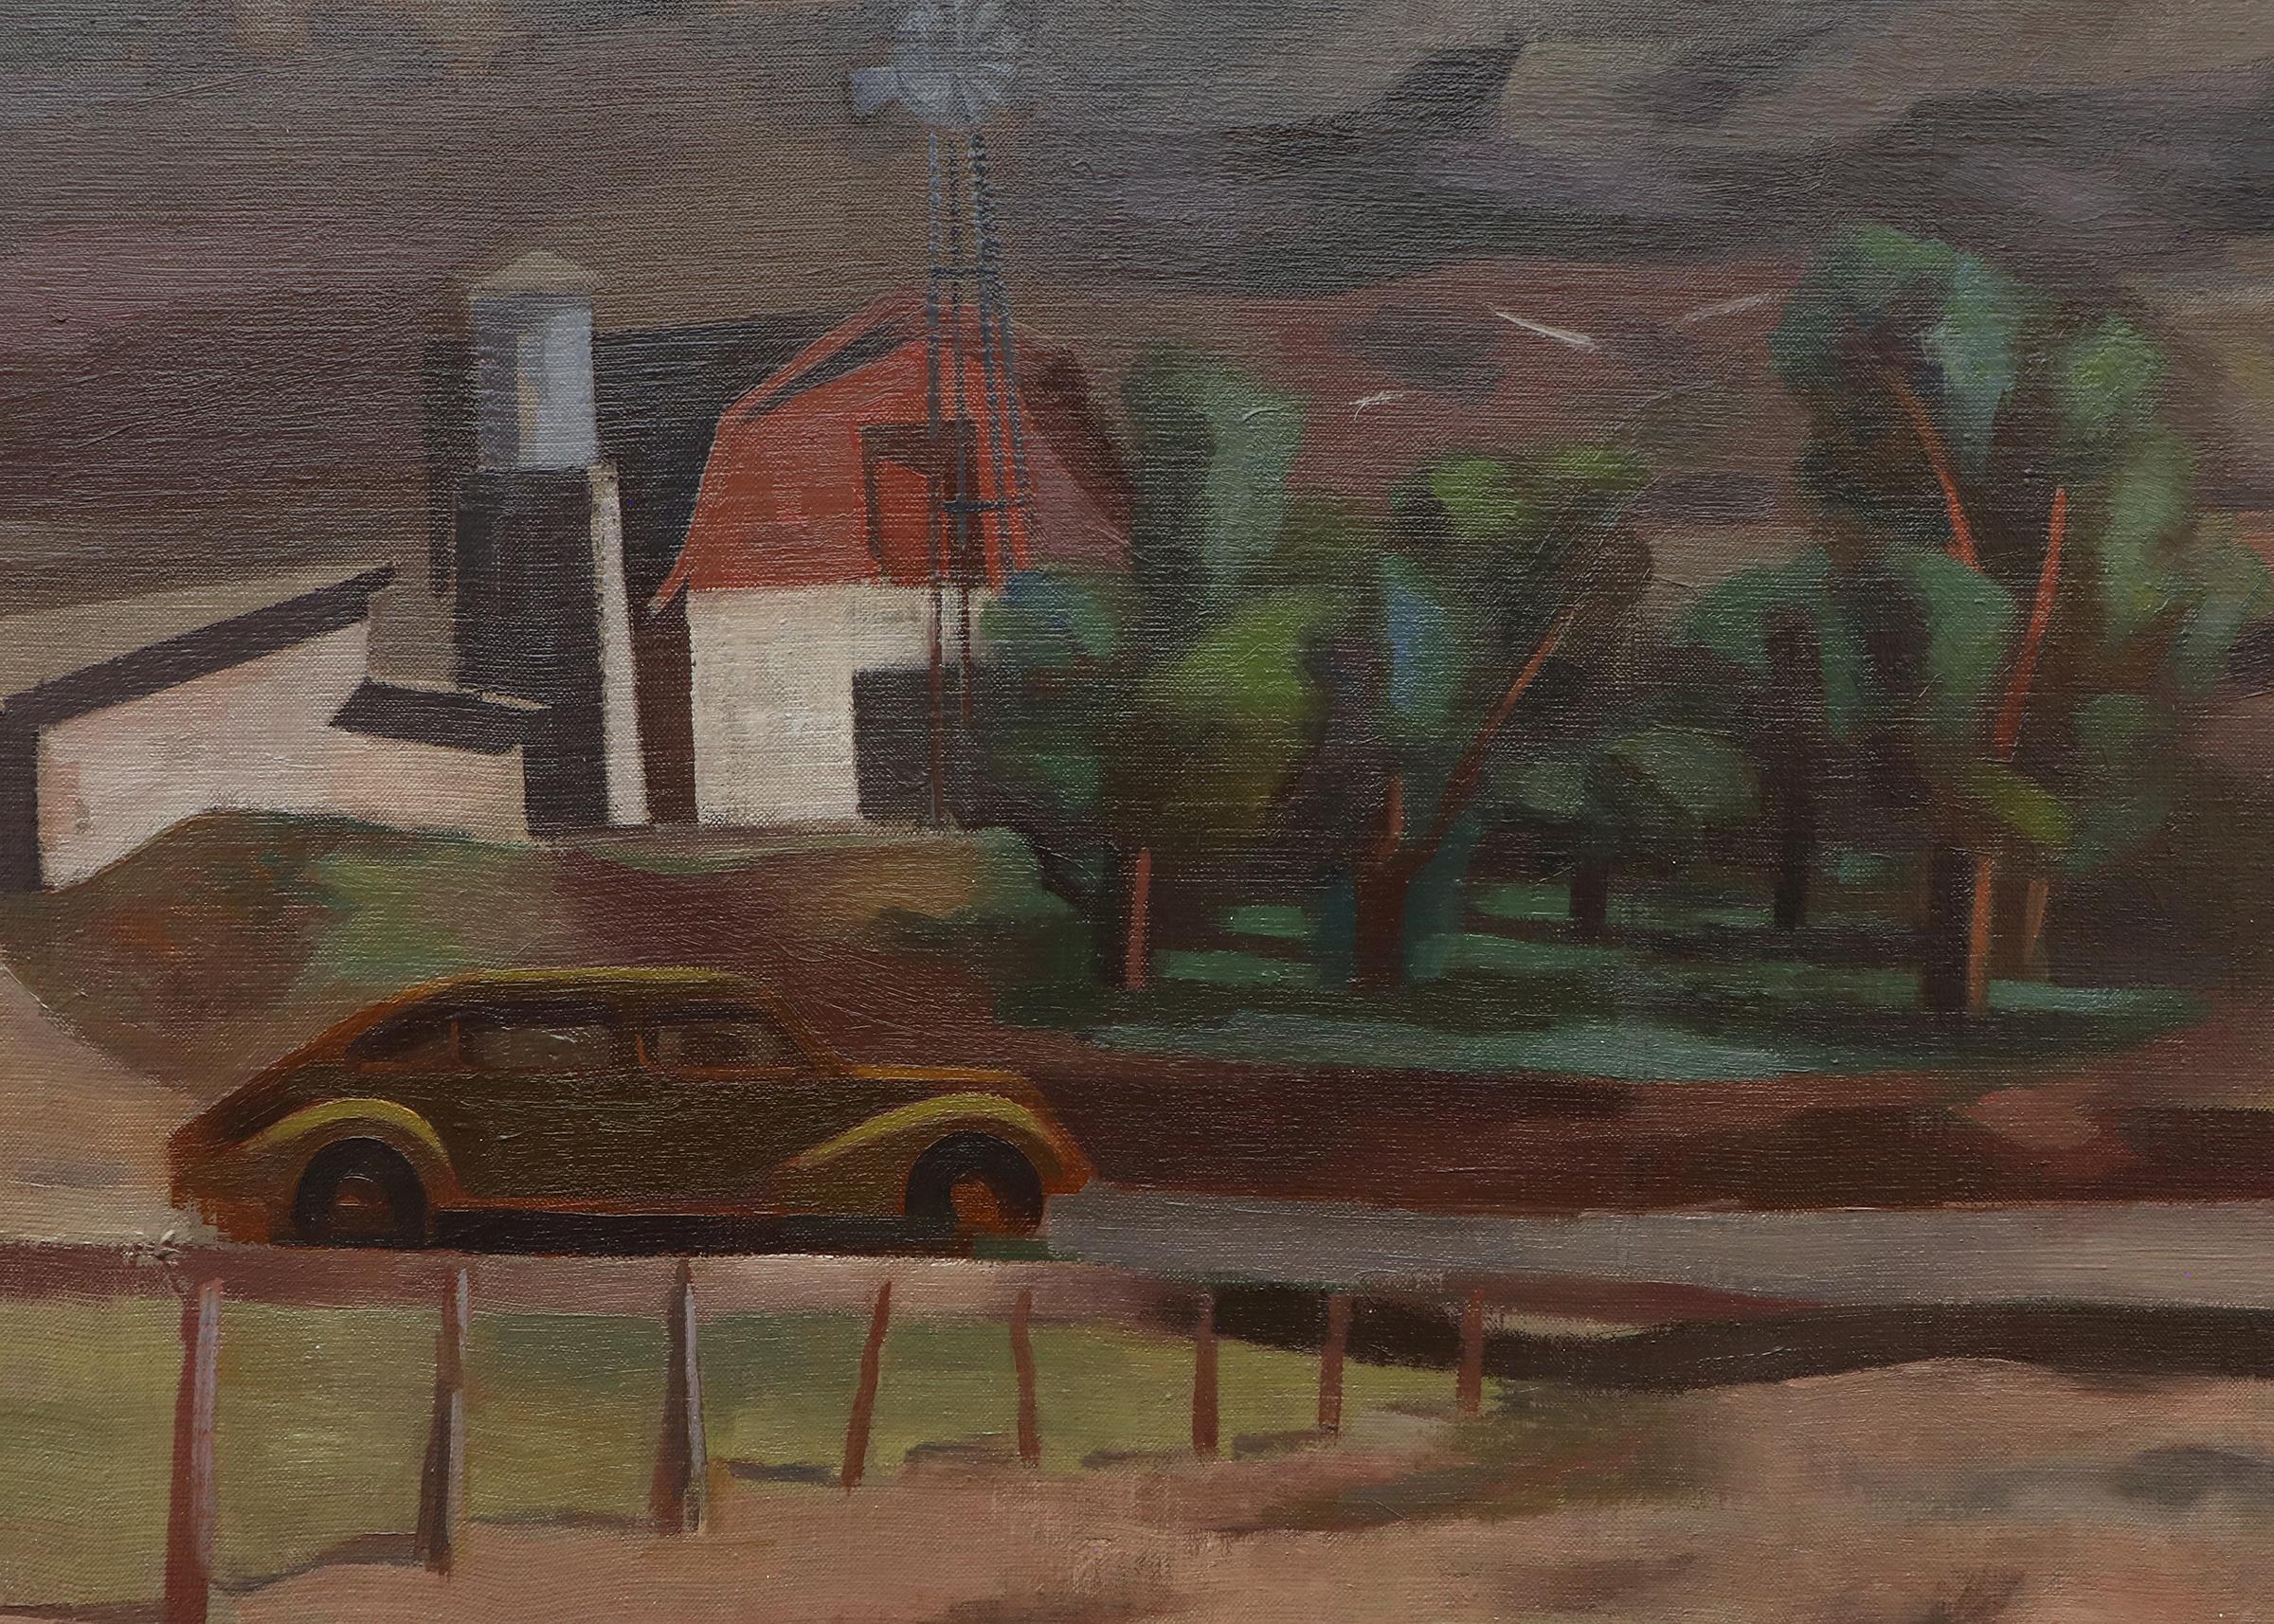 The Hillside, Colorado, 1930s Landscape Oil Painting, Hillside Farm with Truck For Sale 3